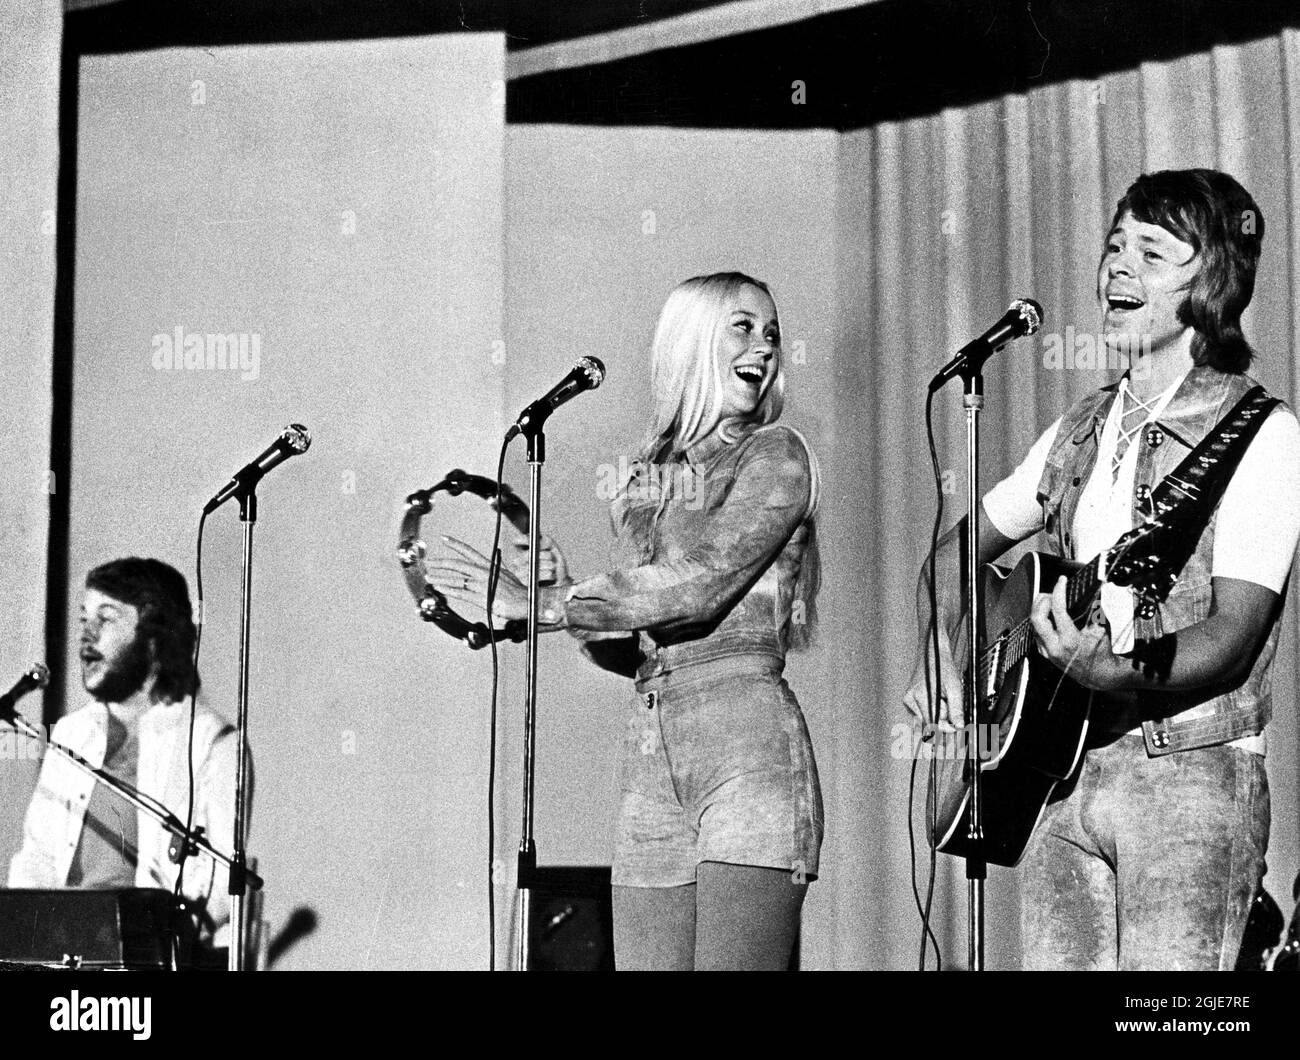 Benny Andersson, Agnetha Faltskog and Bjorn Ulvaeus on stage in Kolback during the Swedish summer tour in 1971. Photo: Expressen / TT / code 192  Stock Photo